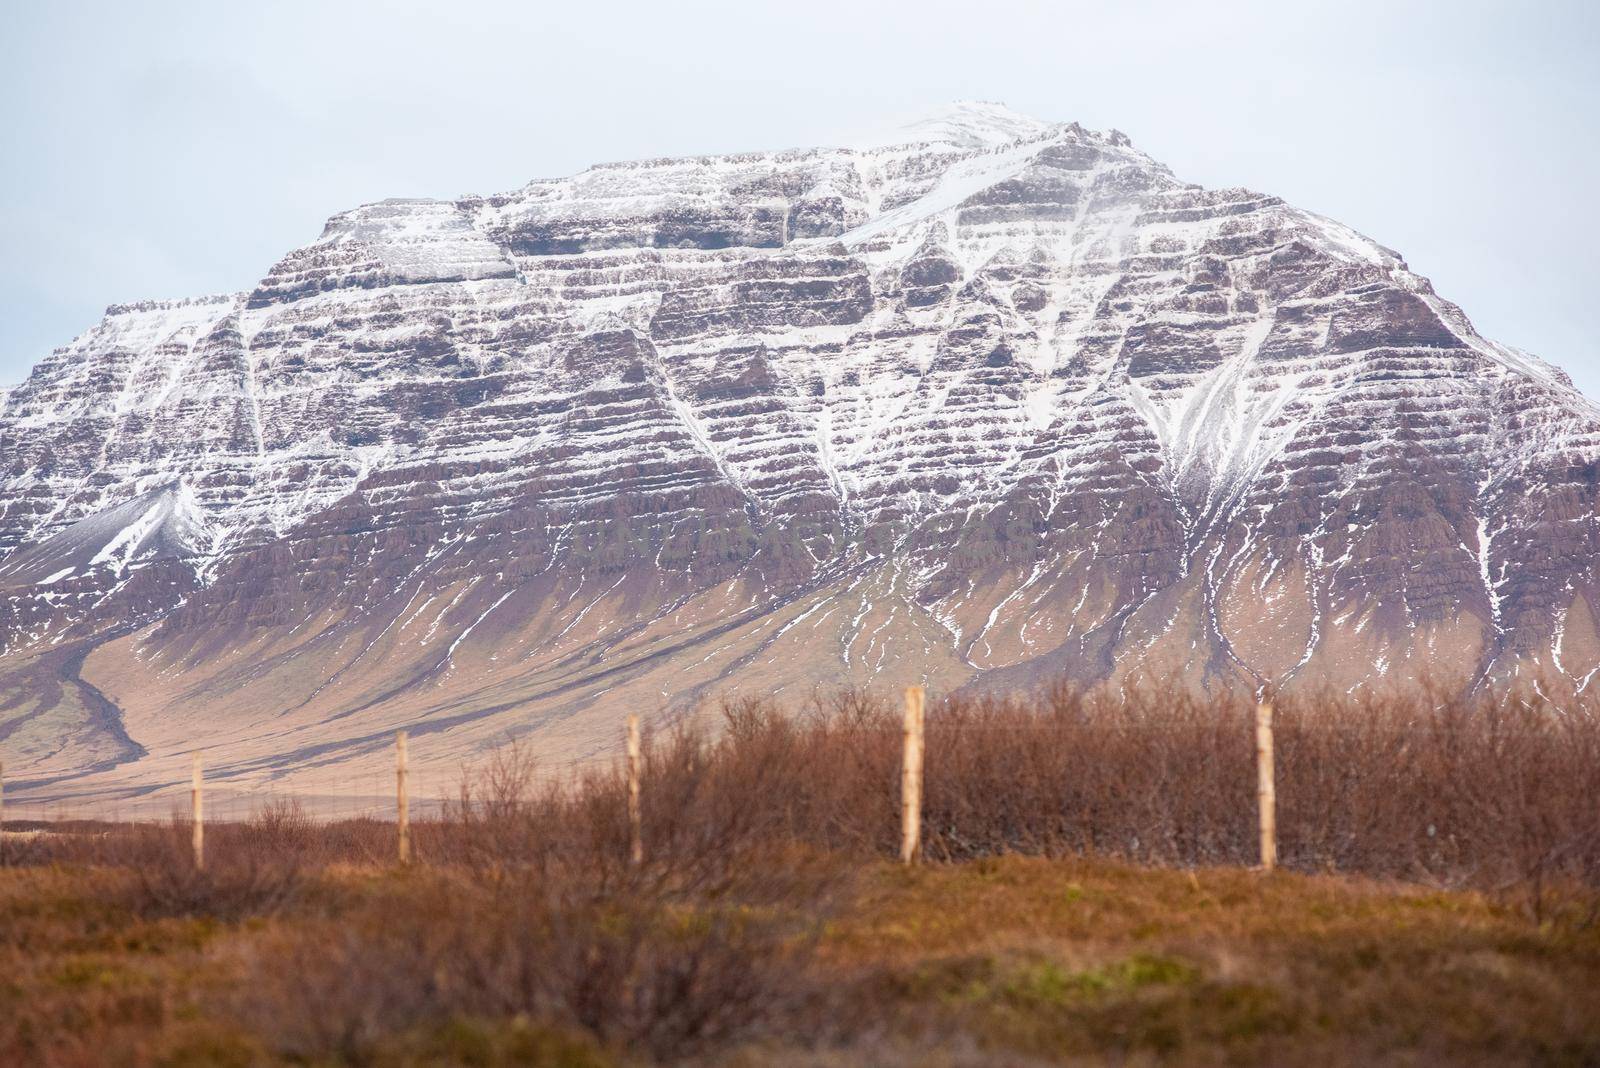 Colorful snow capped mountain showing off textures and layers Icelandic landscape with fence line by jyurinko